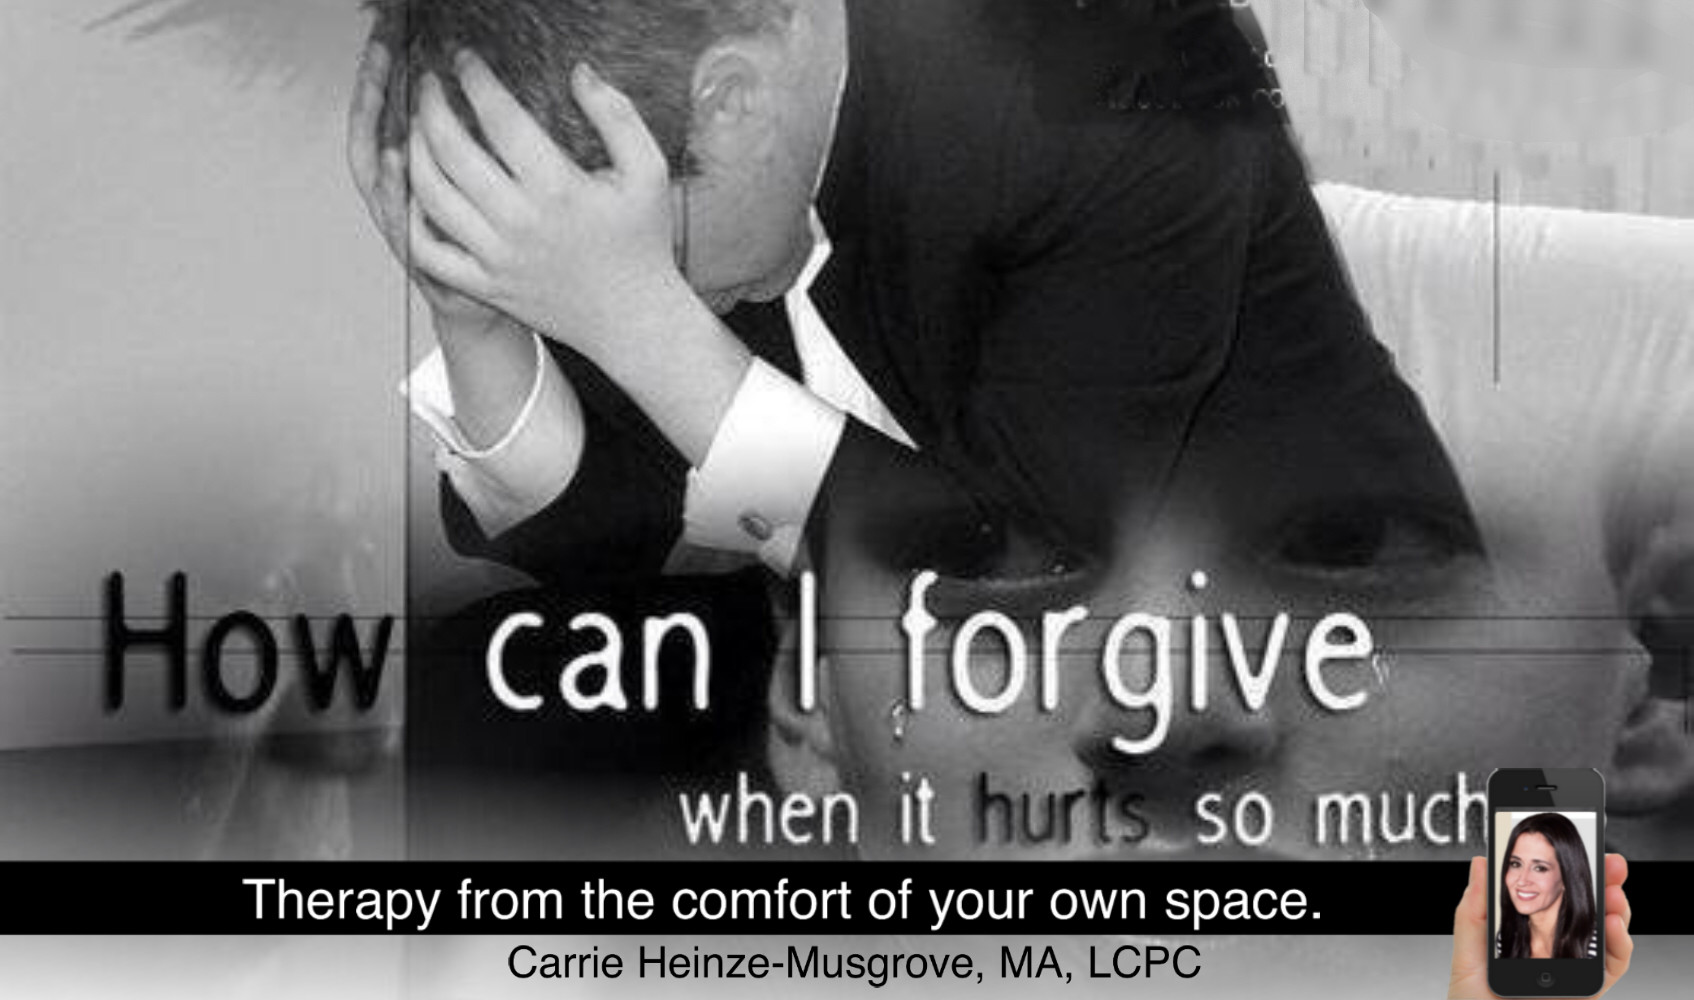 Everyone thinks forgiveness is a lovely idea, until he has something to forgive” ~ C.S. Lewis